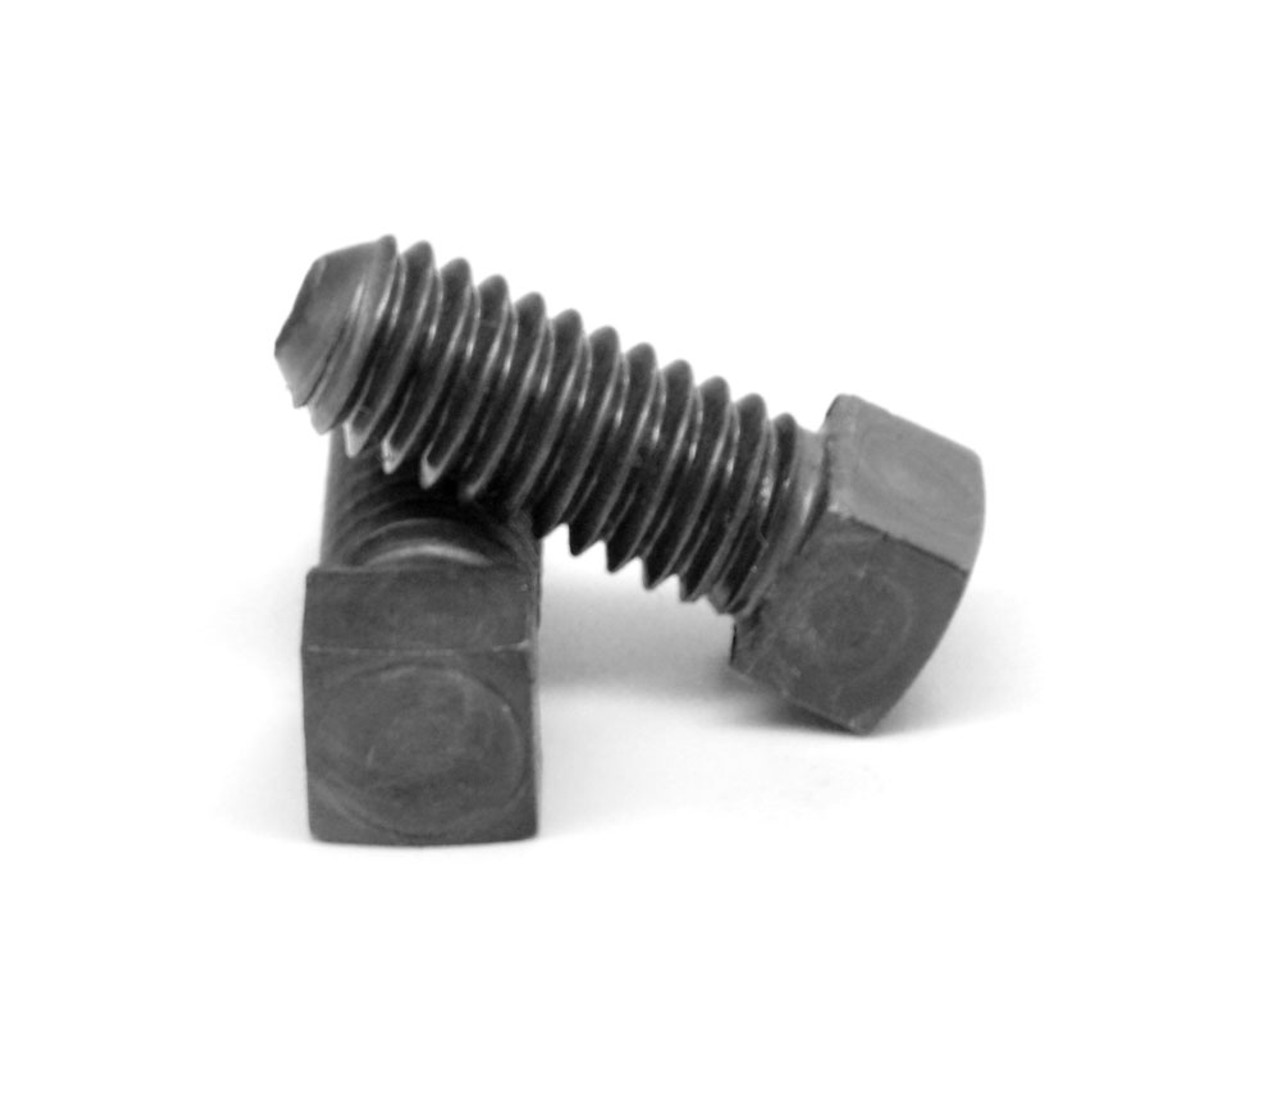 1"-8 x 4" (FT) Coarse Thread Square Head Set Screw Cup Point Low Carbon Steel Case Hardened Plain Finish